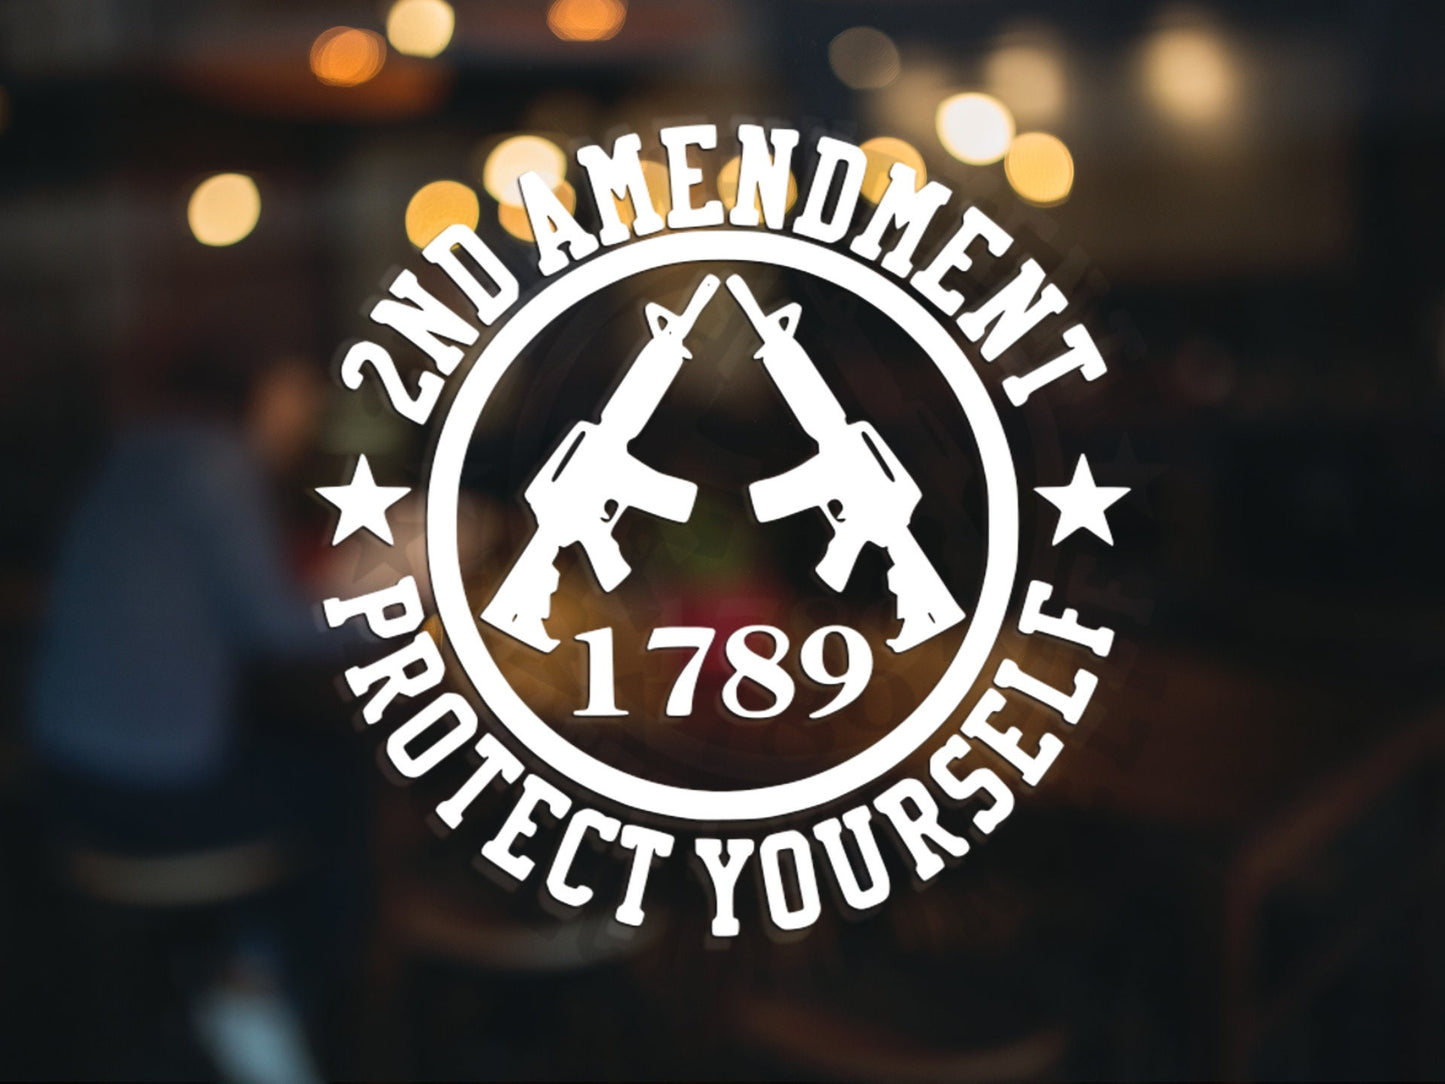 1789 Protect Yourself Decal - Many Colors & Sizes